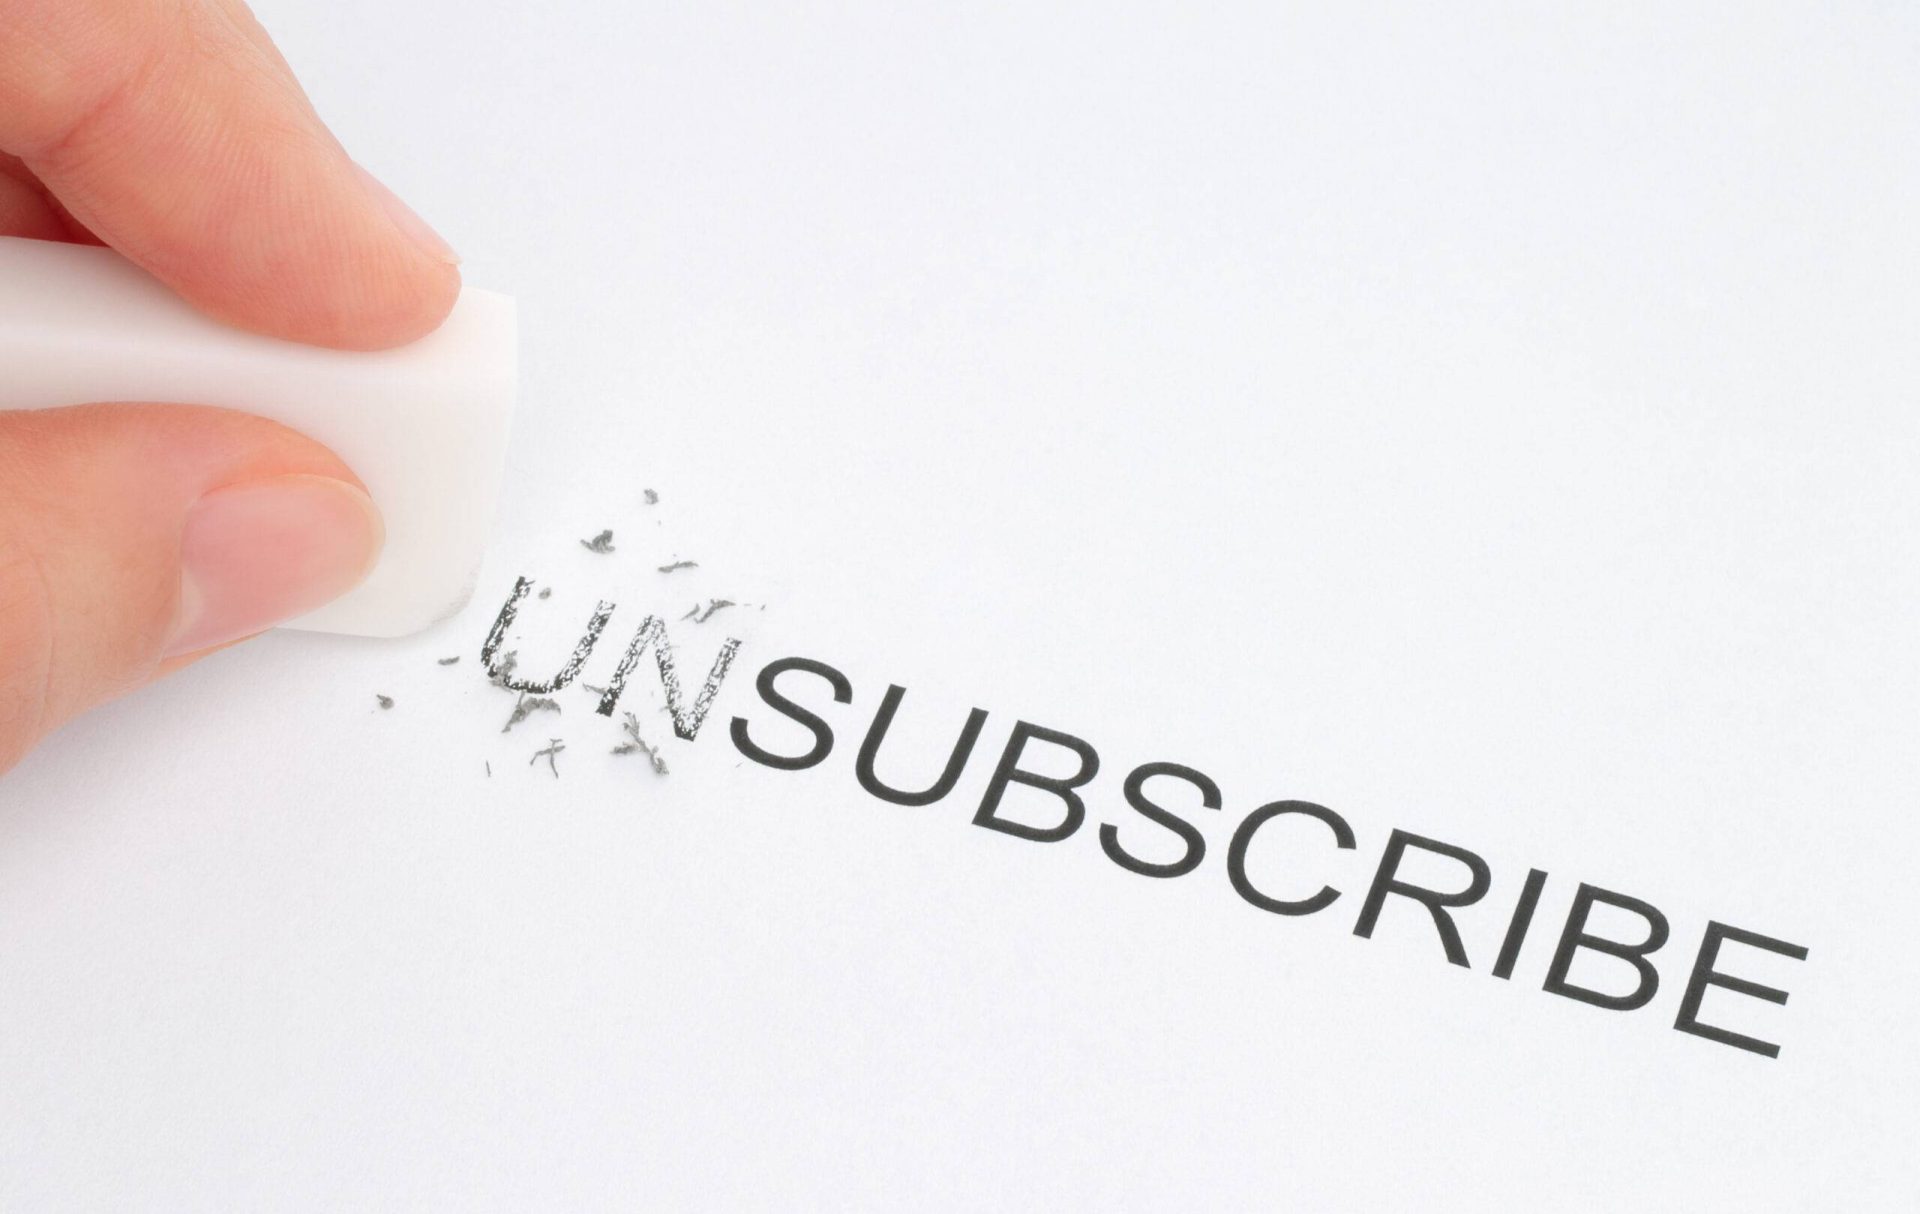 Hand erase part of the unsubscribe word close-up